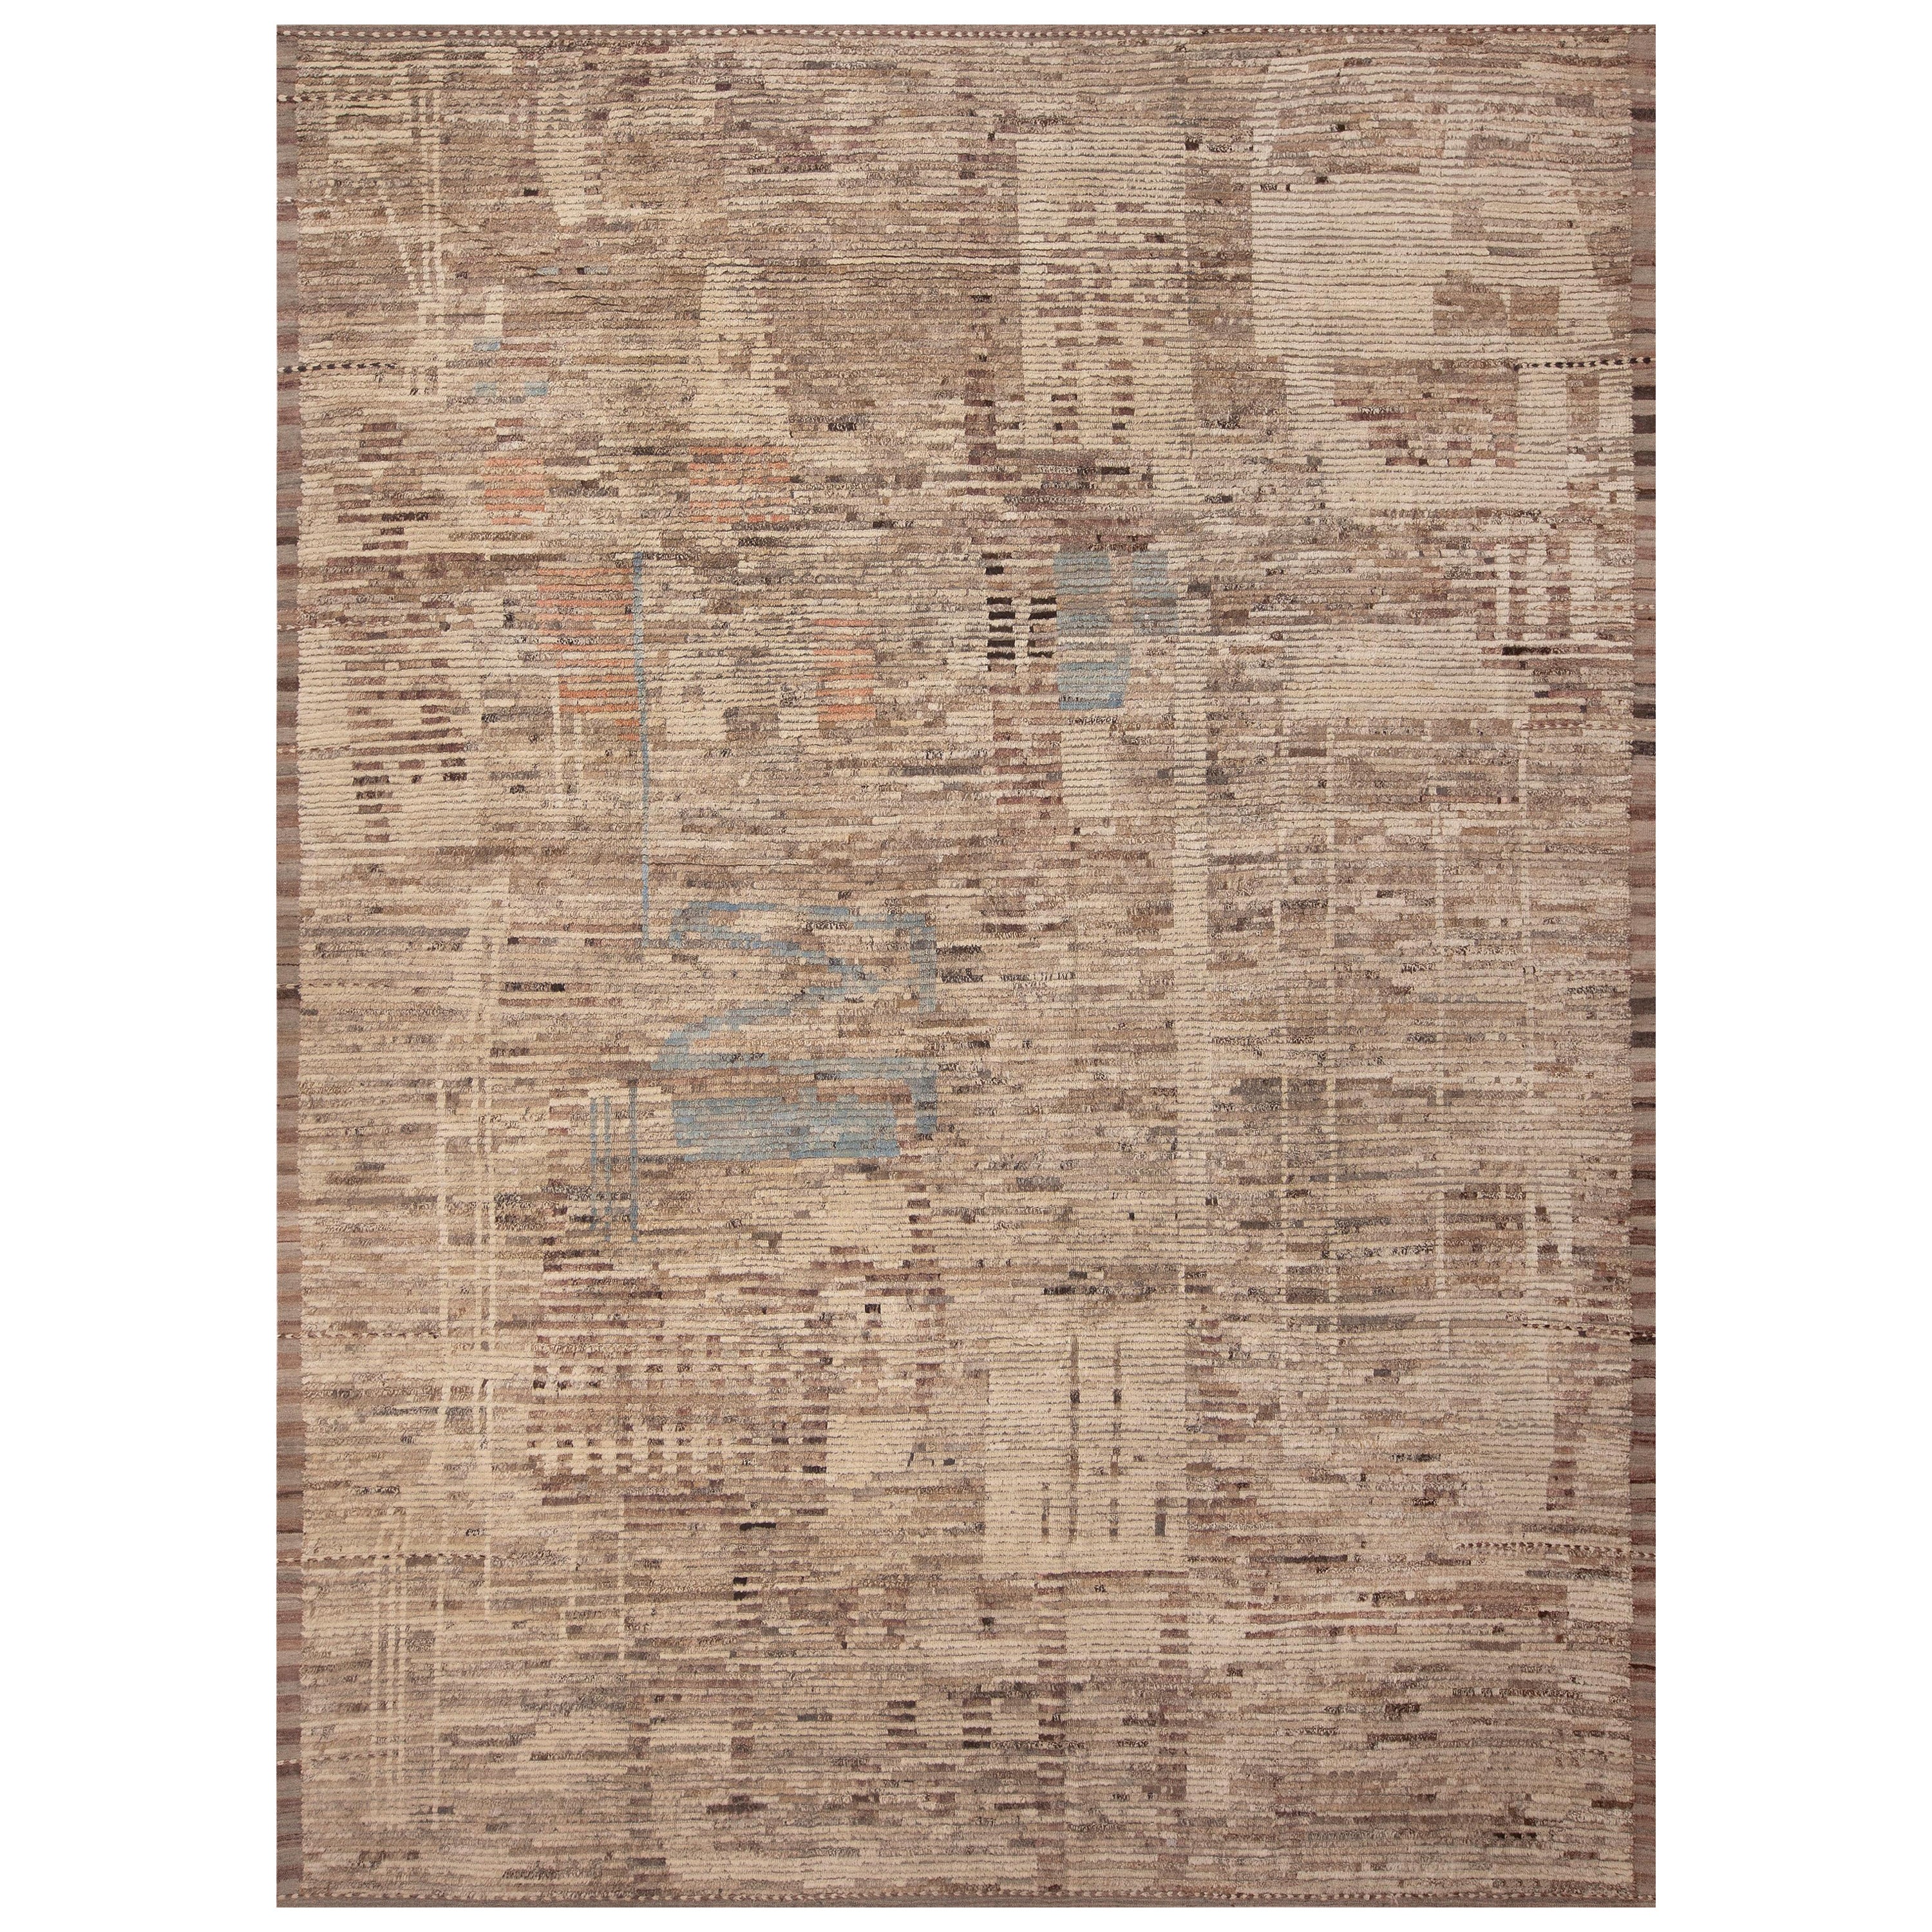 Nazmiyal Collection Earthy Abstract Nomadic Modern Area Rug 10'6" x 14'2" For Sale